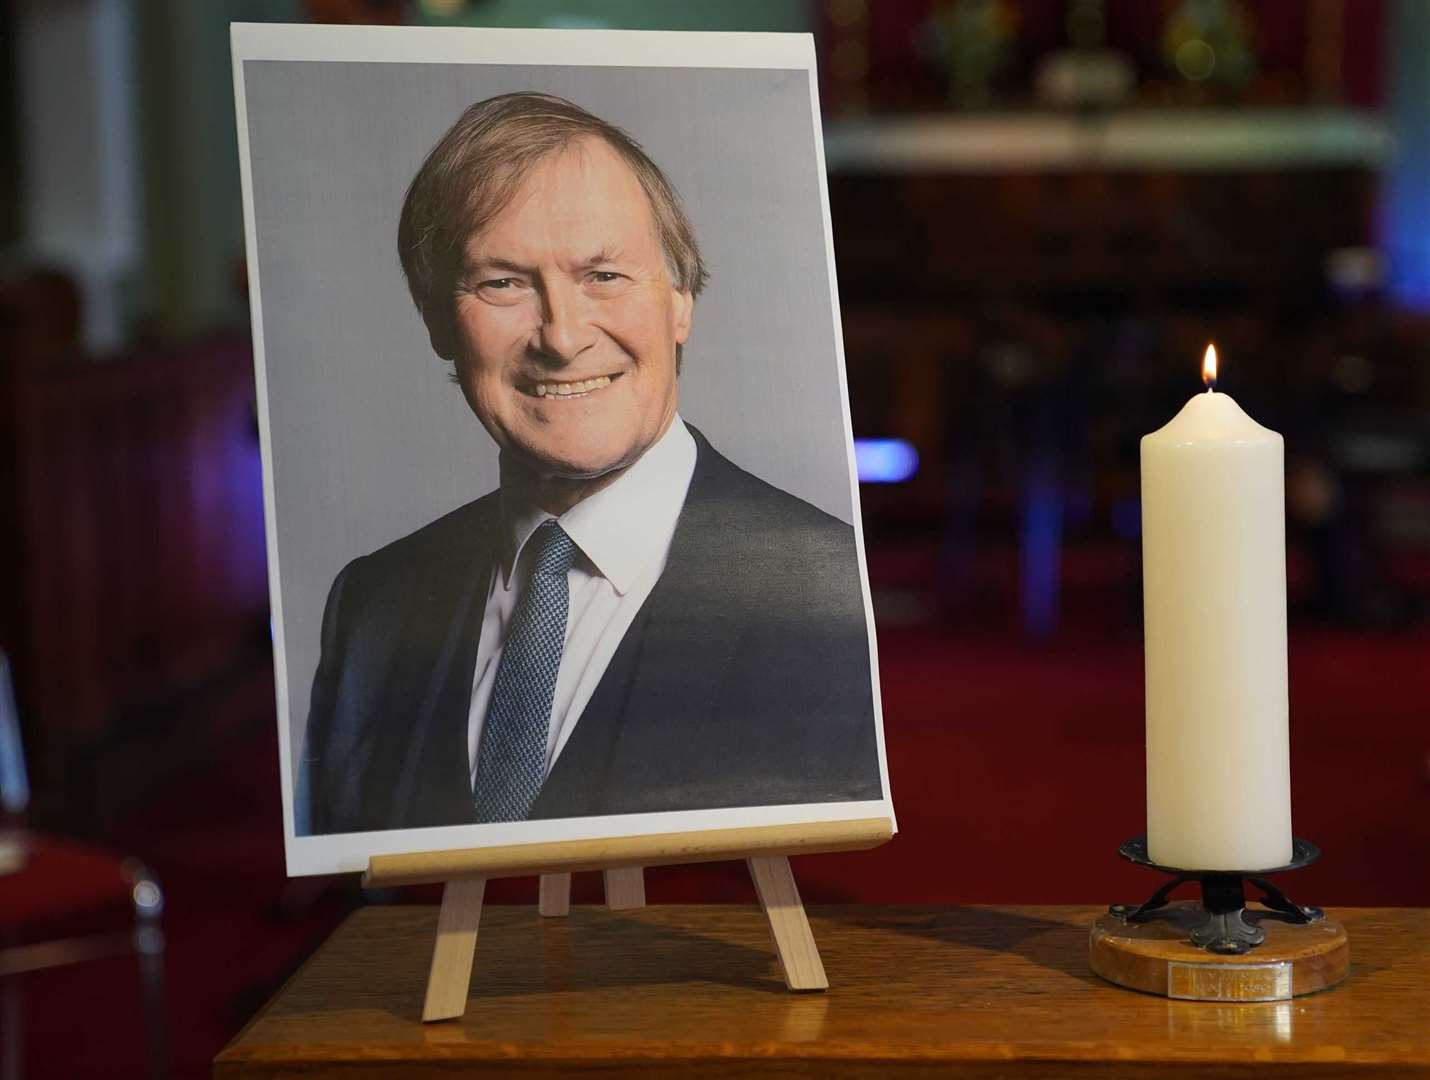 Sir David Amess MP was killed in his home constituency in Essex. Picture: Kirsty O’Connor/PA